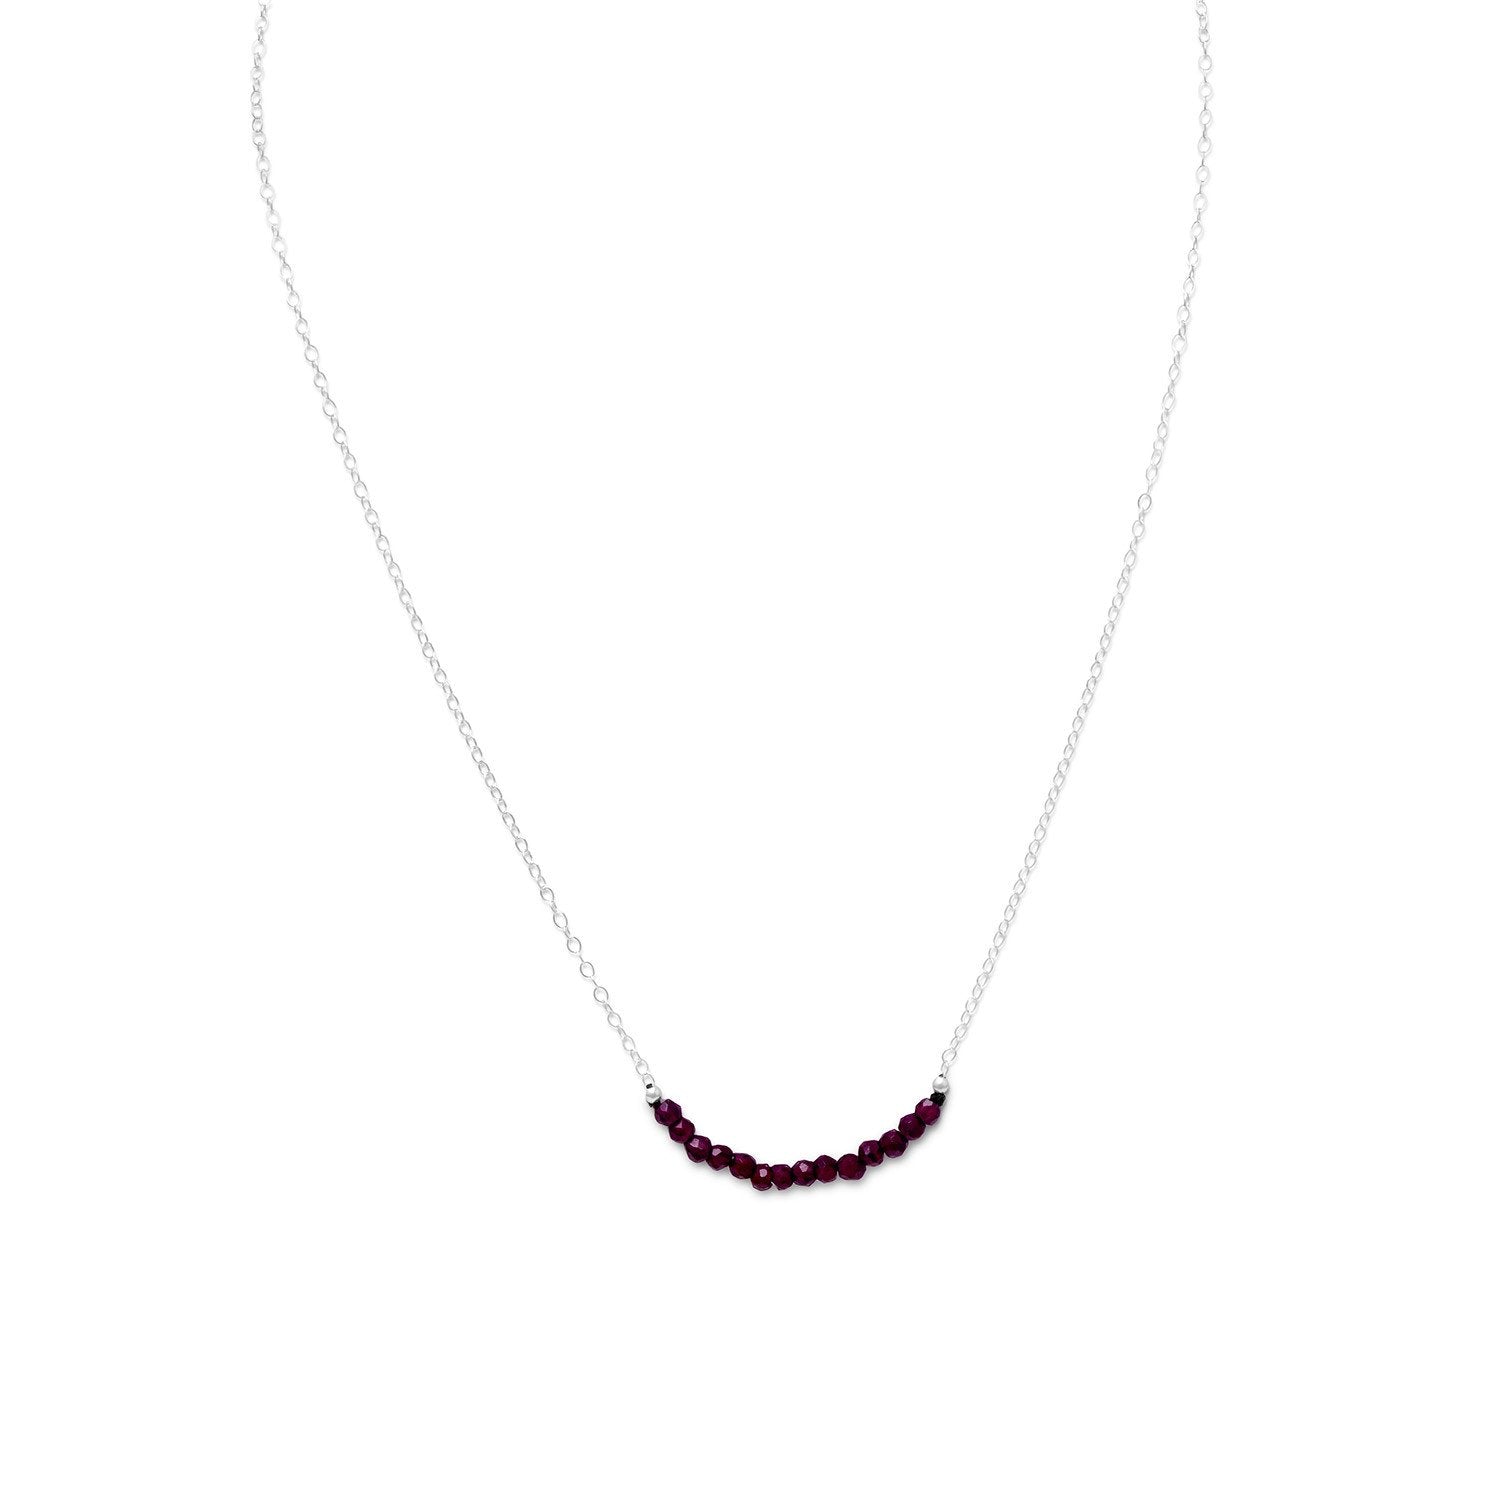 Faceted Garnet Bead Necklace - January Birthstone